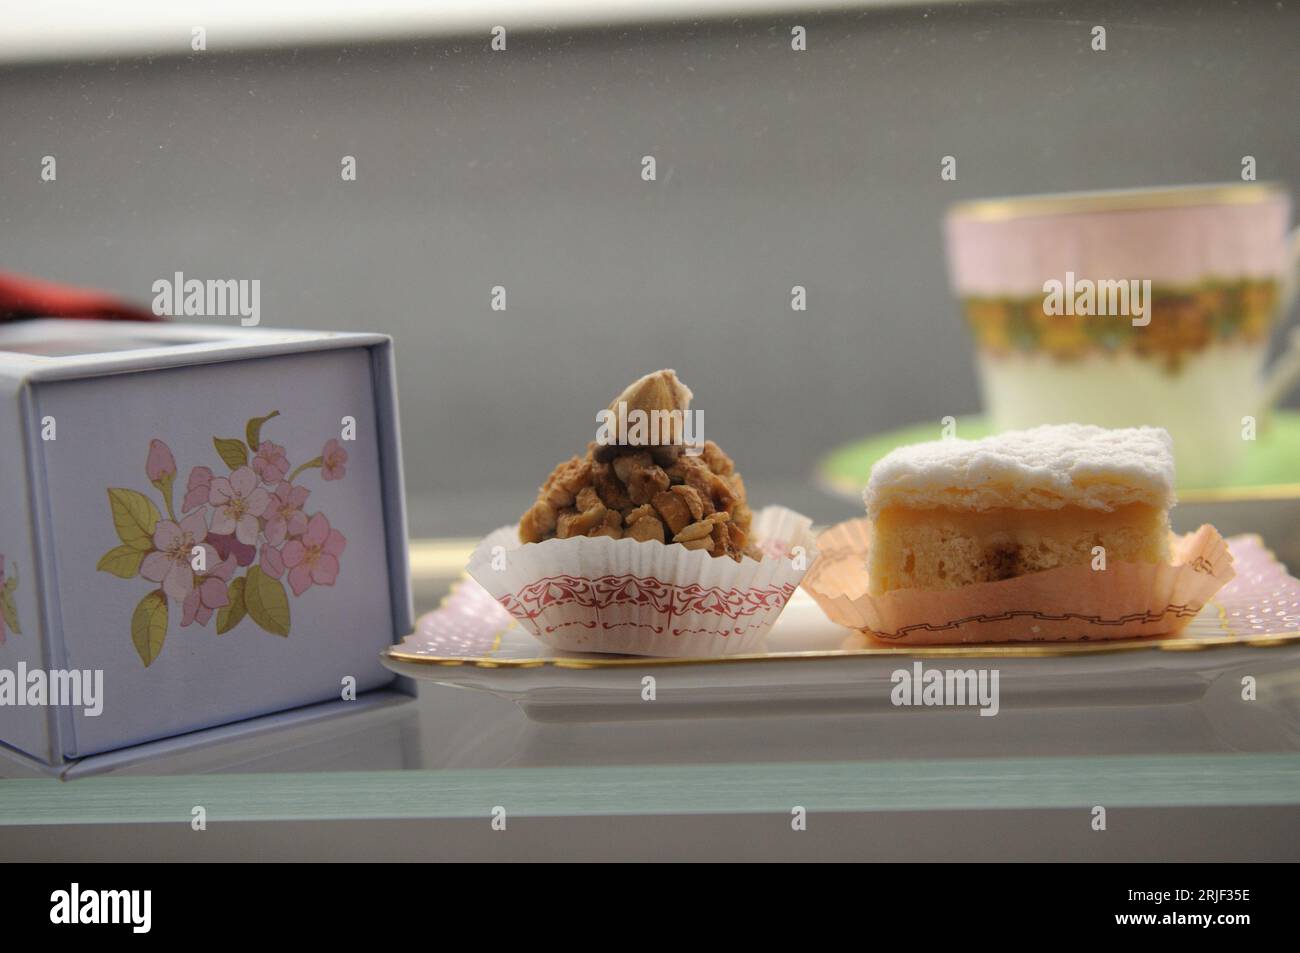 Window shopping at a Cake shop, Pastry shop, Bakery Stock Photo